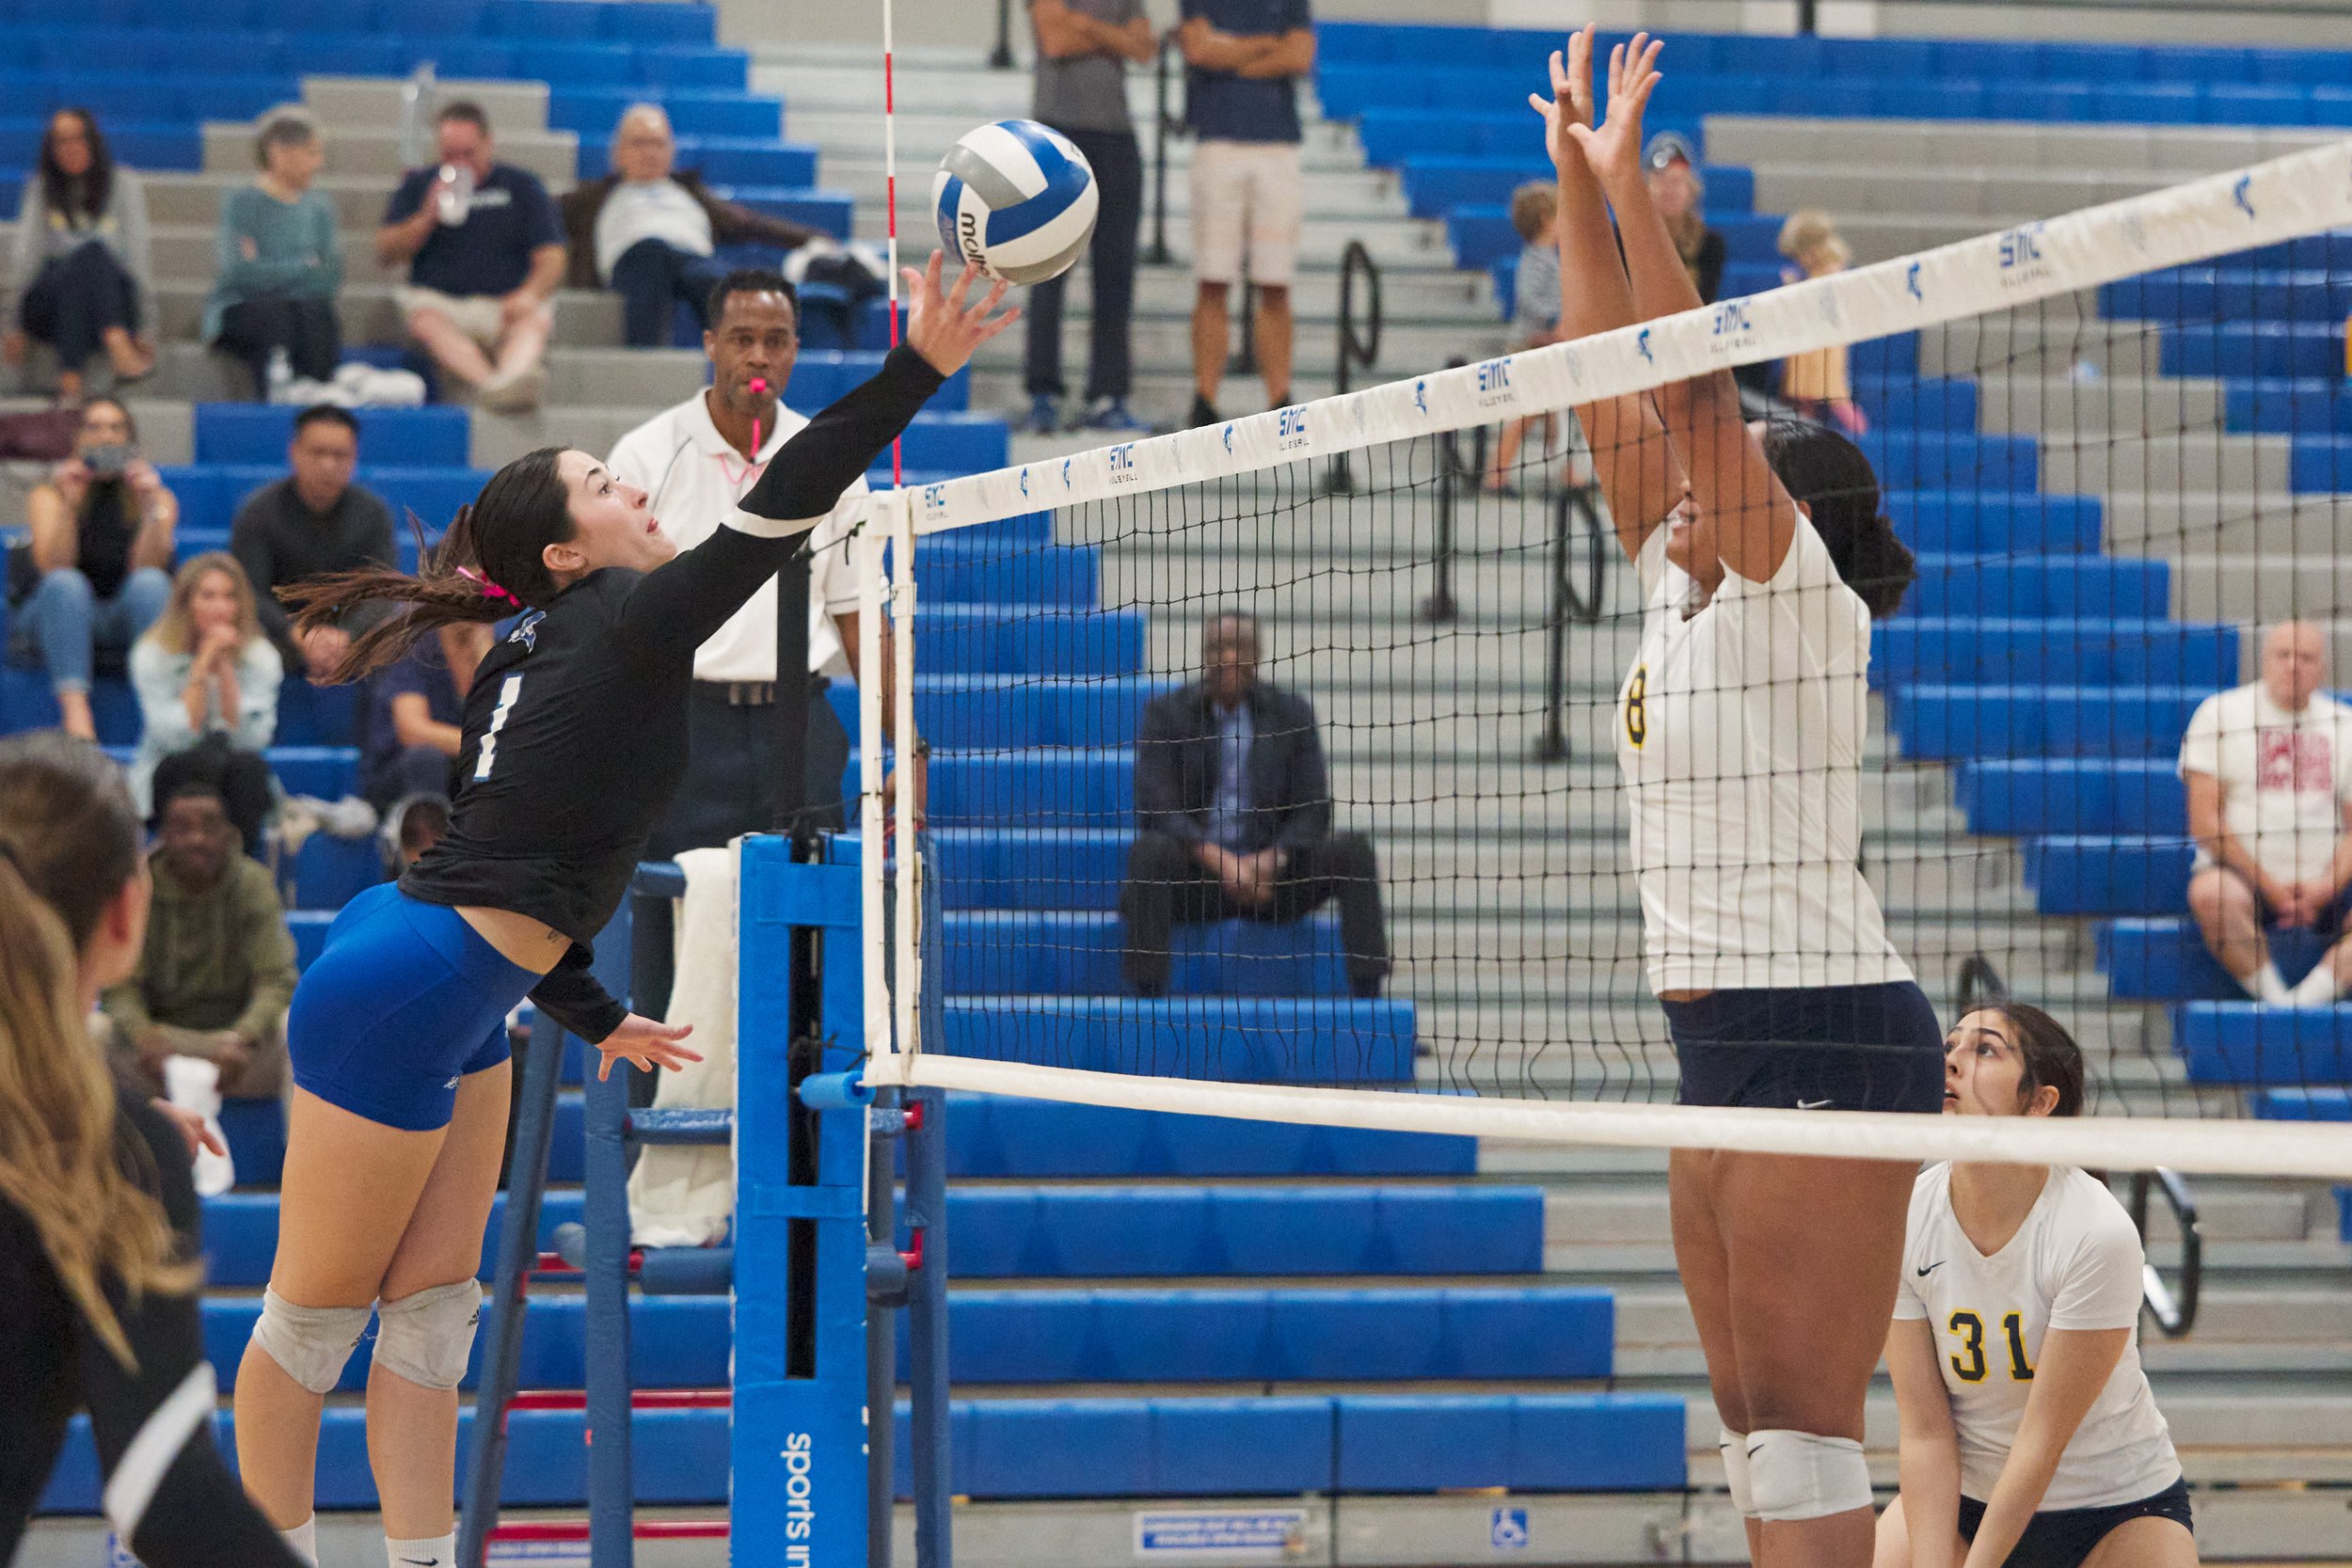  Santa Monica College Corsairs' Maiella Riva hits the ball past College of the Canyons Cougars' Leah Gillie during the women's volleyball match on Friday, Oct. 27, 2023, at Corsair Gym in Santa Monica, Calif. The Corsairs won 3-0. (Nicholas McCall | 